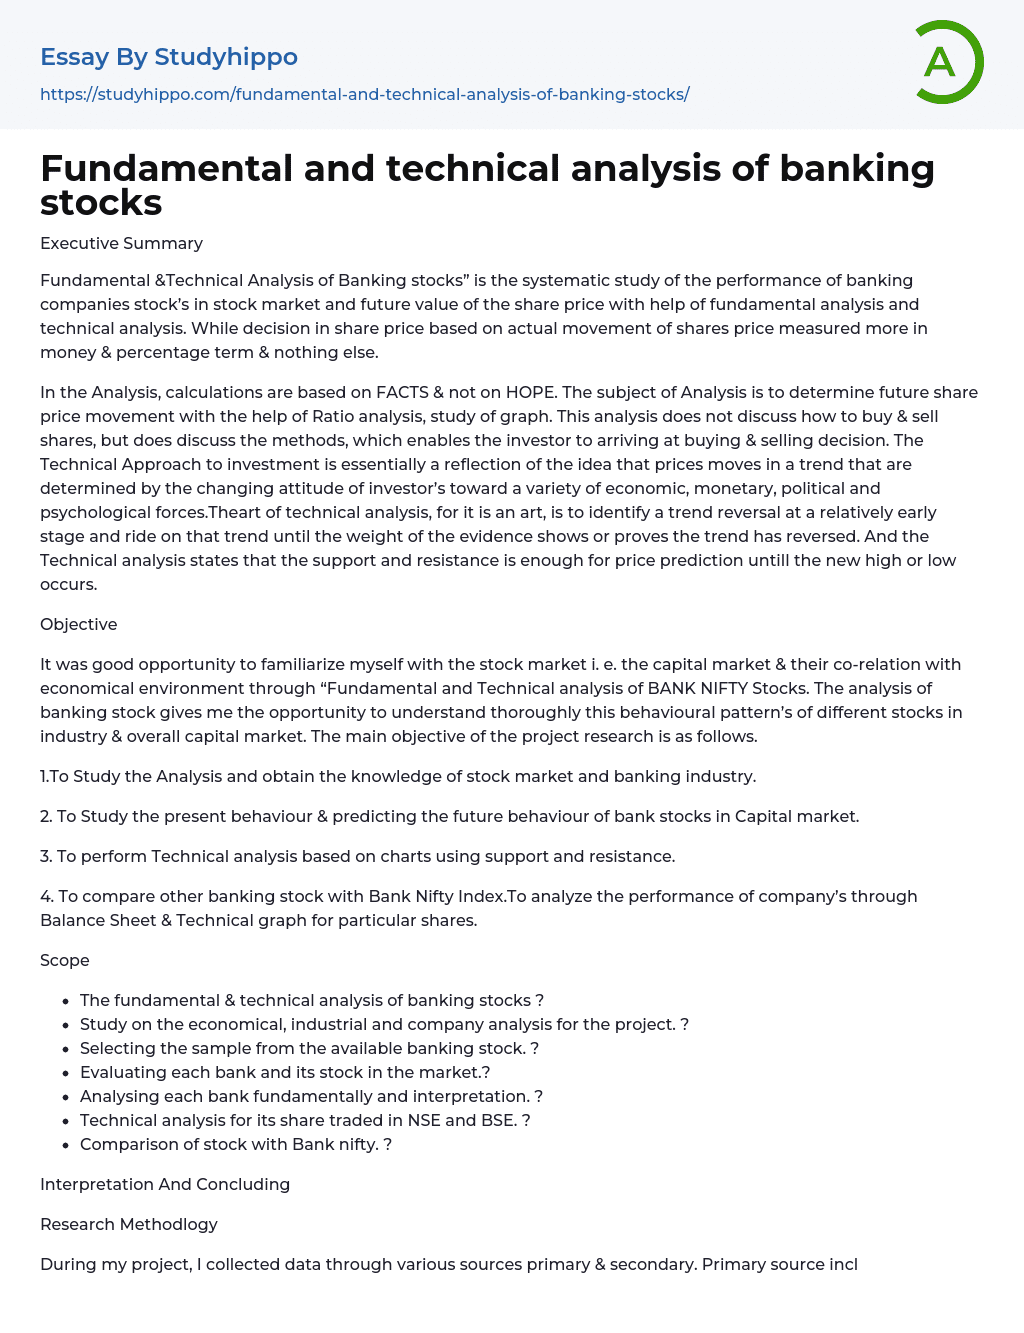 write an essay on innovative banking